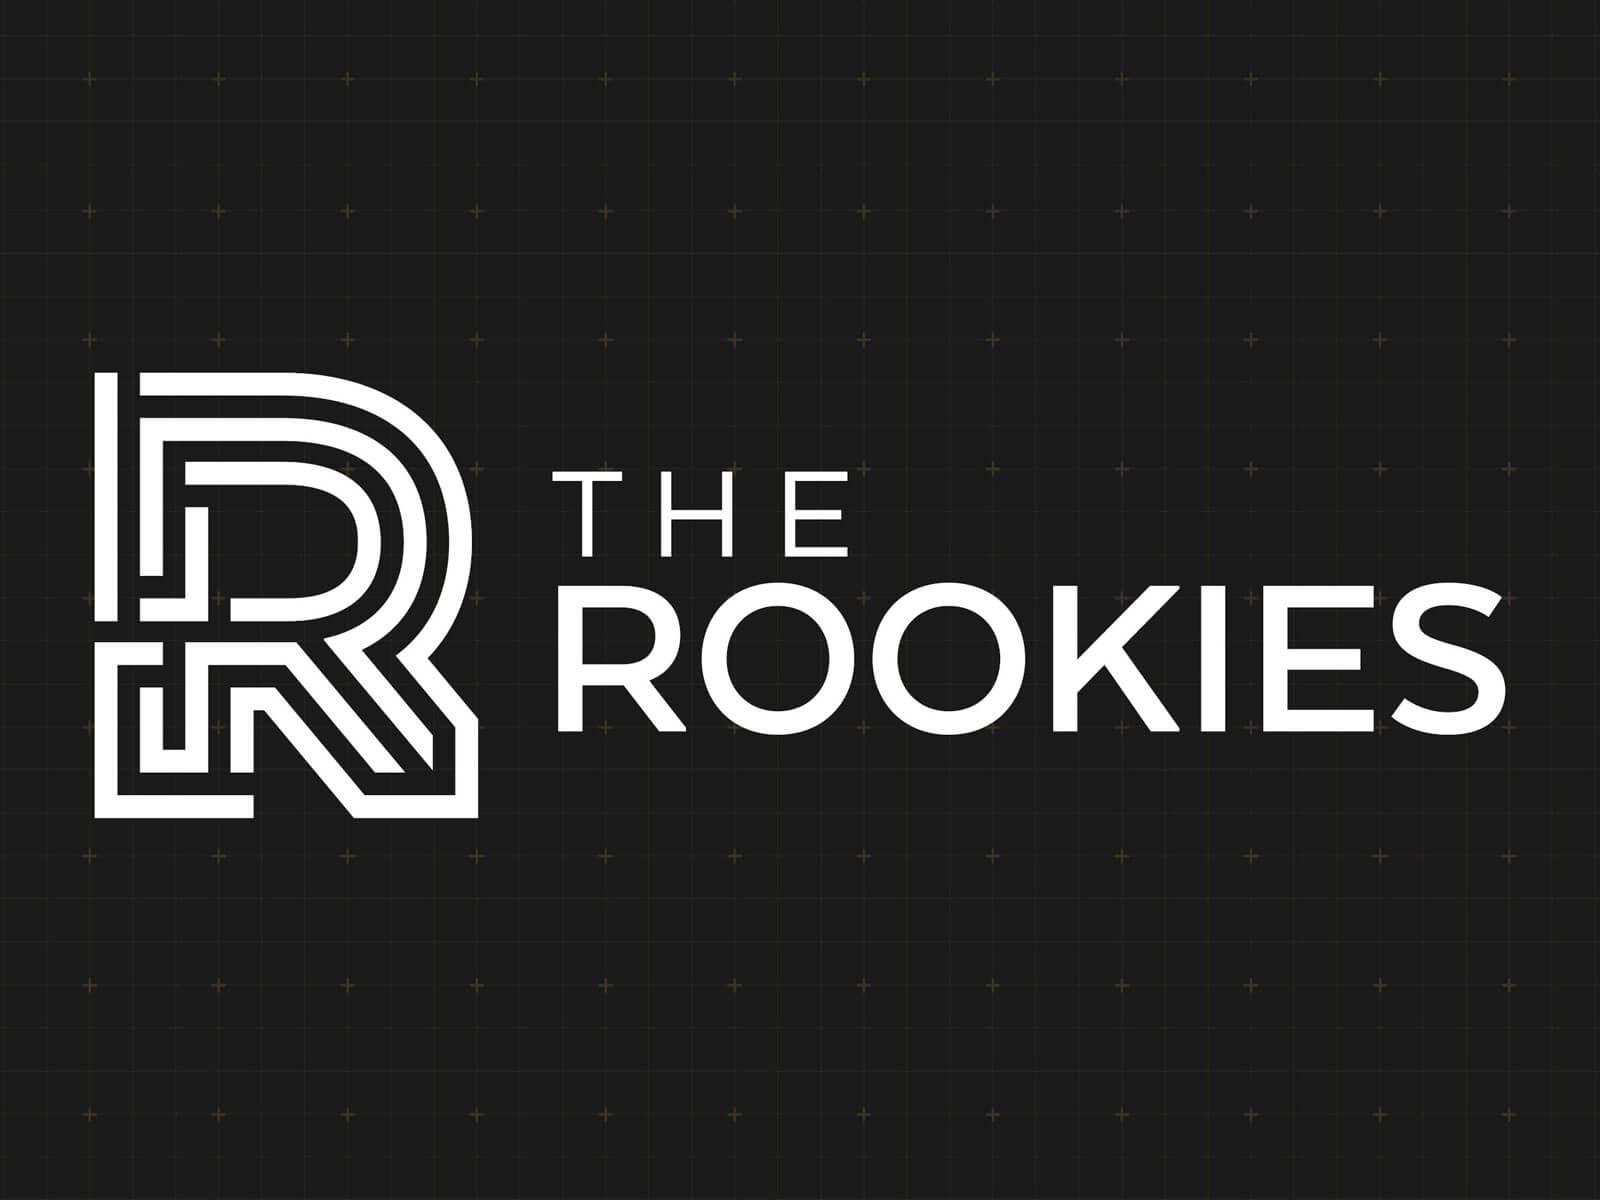 The Rookies logo set against a black background